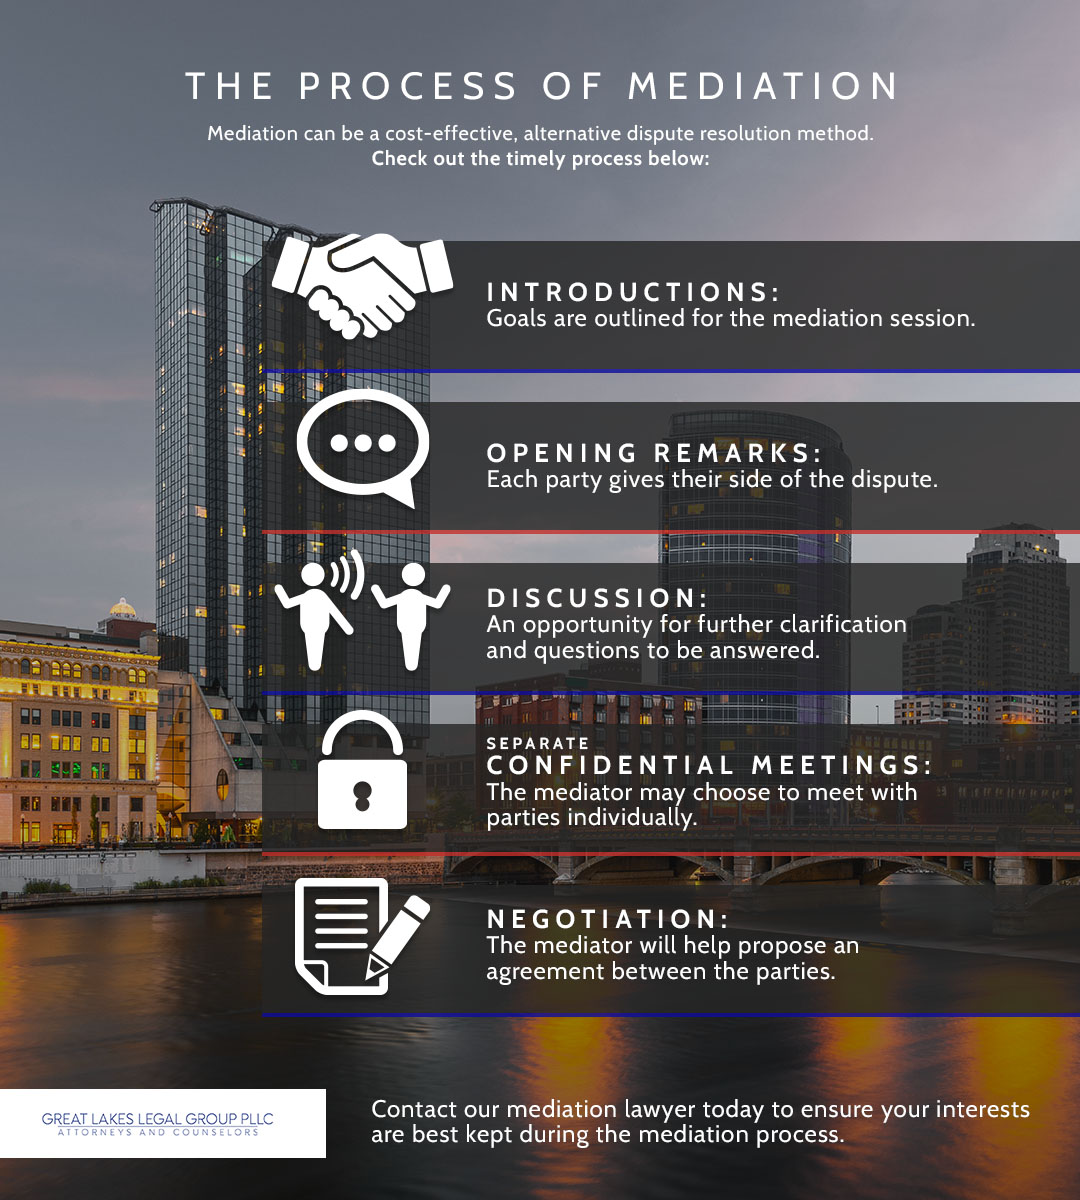 IG-The Process of Mediation_